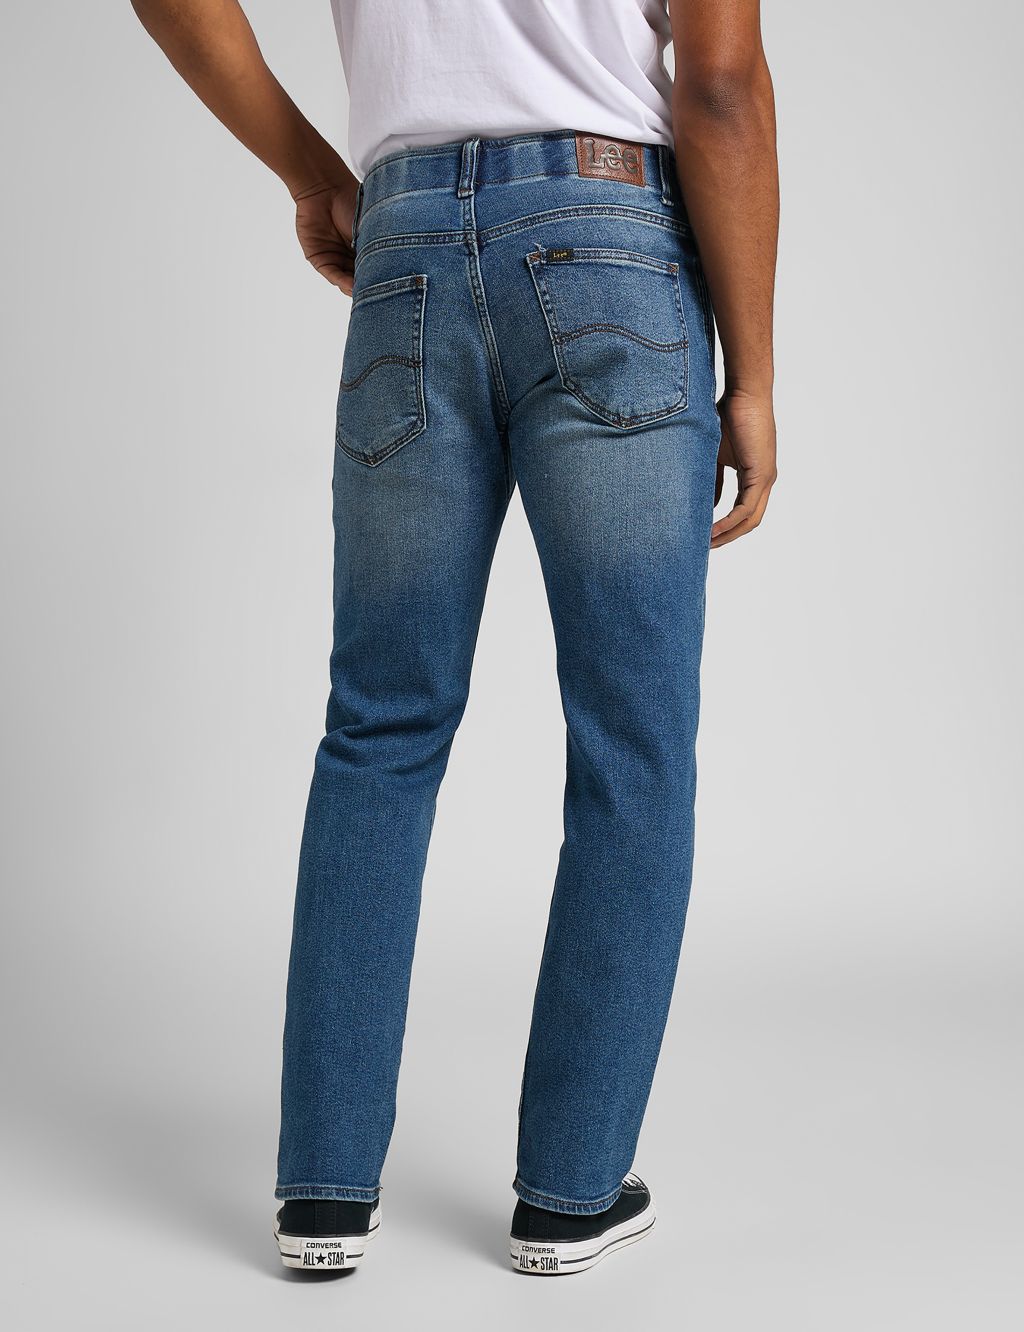 Straight Fit XM 5 Pocket Jeans image 3